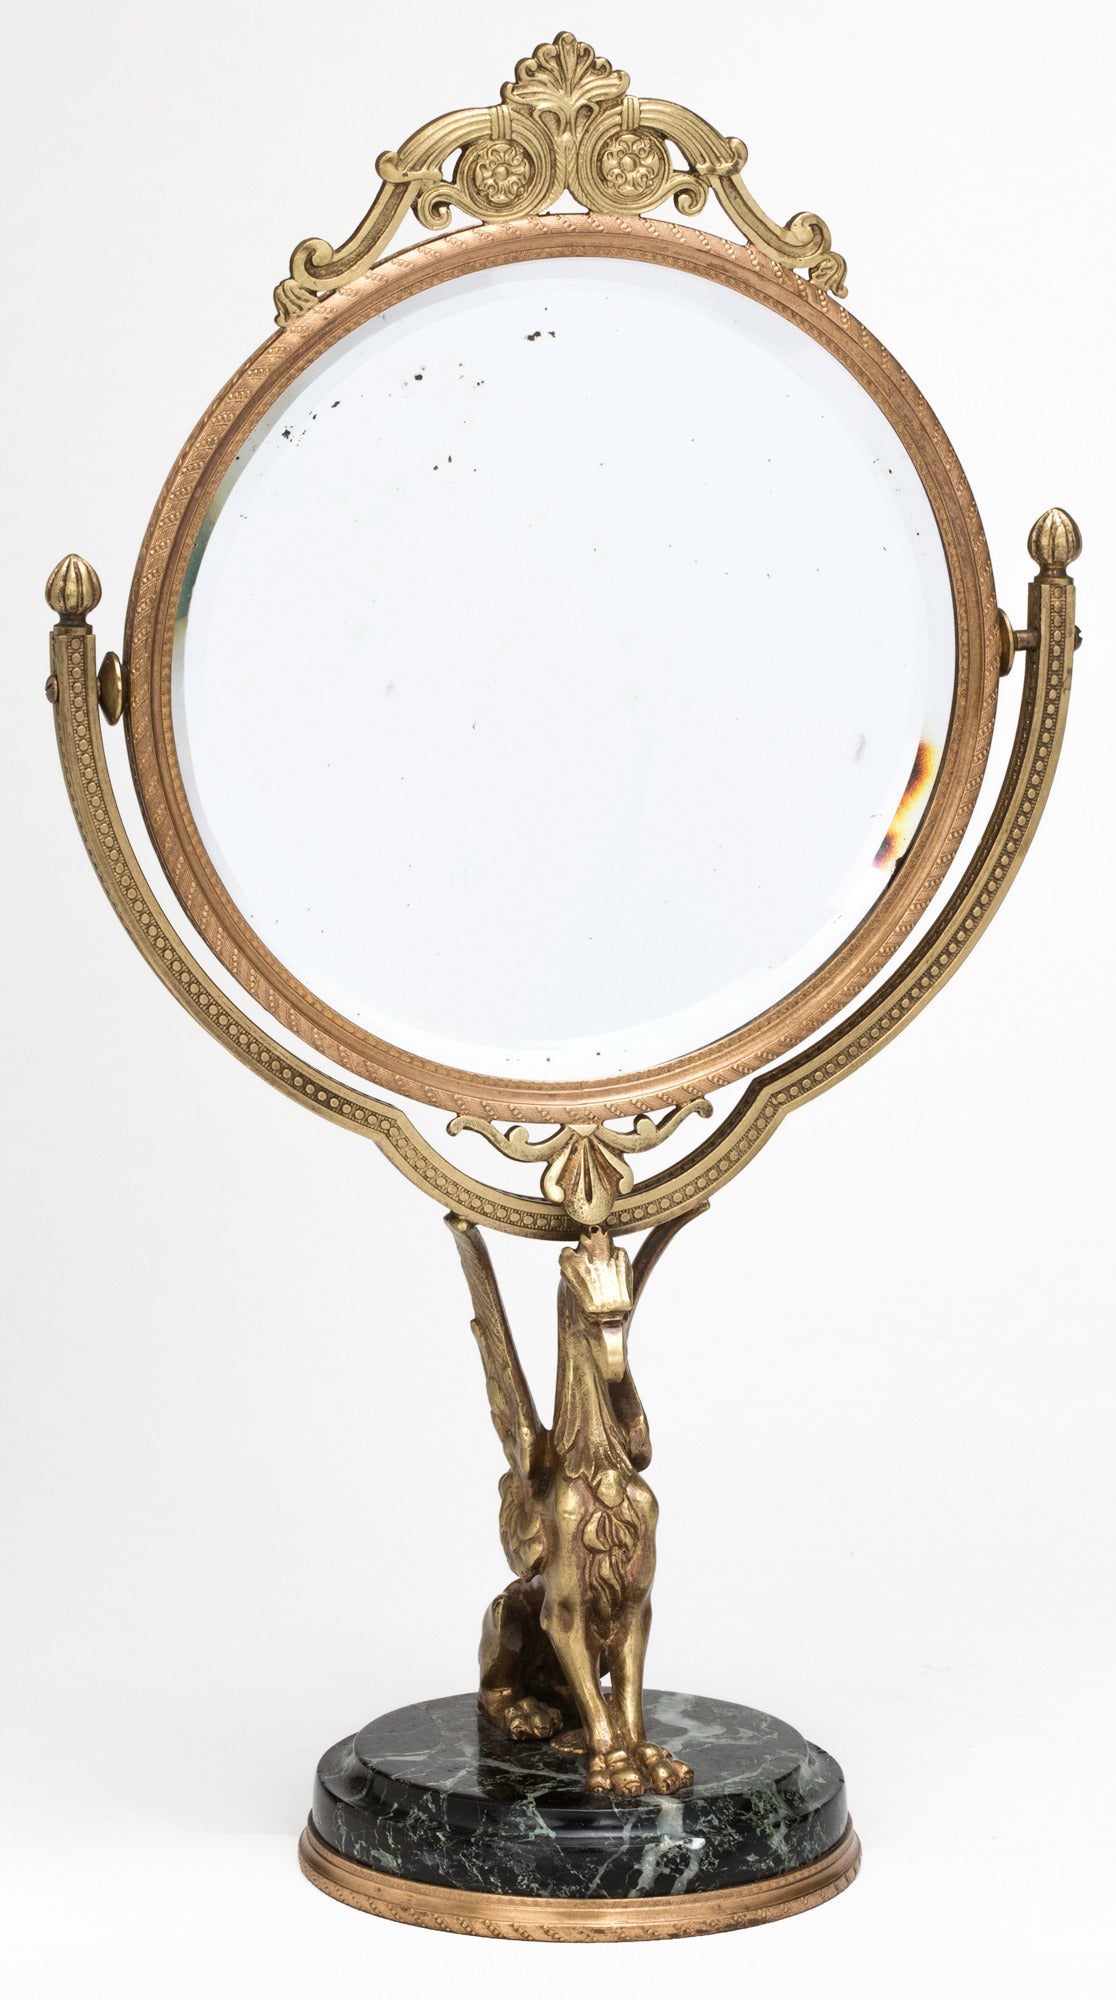 Circa 1930s. Rare decorative vanity tilting table mirror. Gilt bronze frame with bevel mirror, supported by gilt bronze griffin on round marble base.